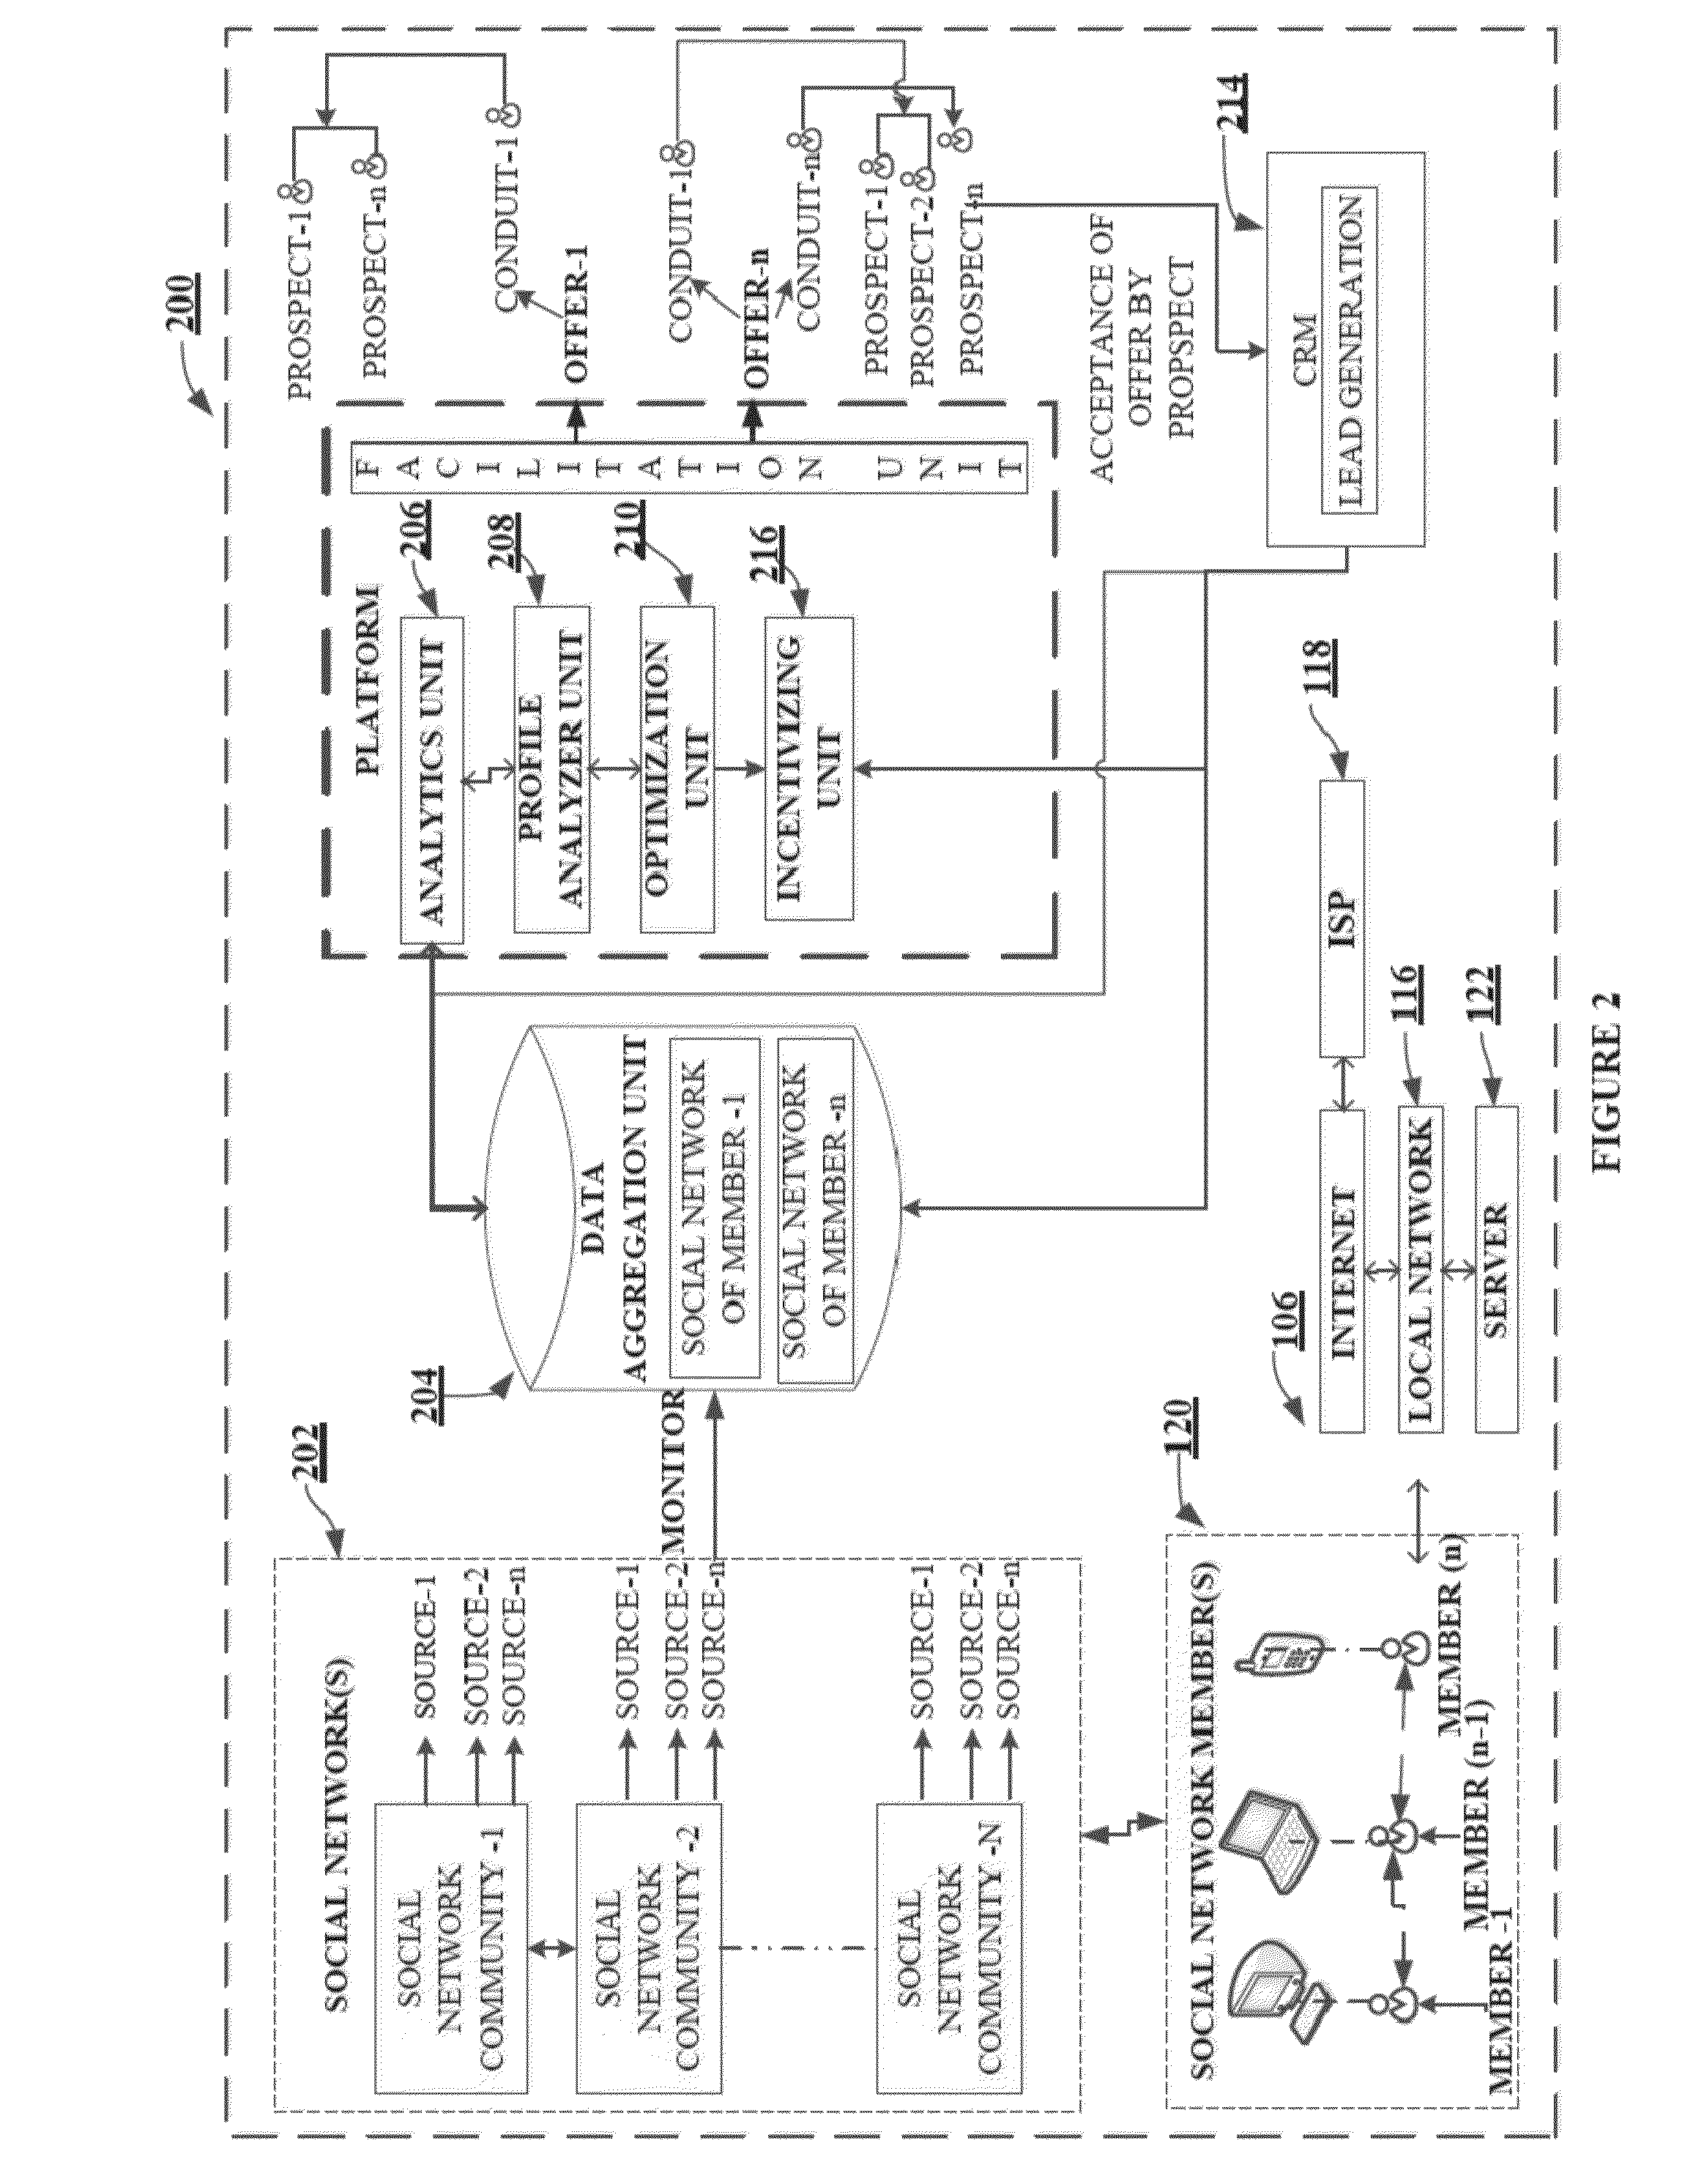 System for making personalized offers for business facilitation of an entity and methods thereof